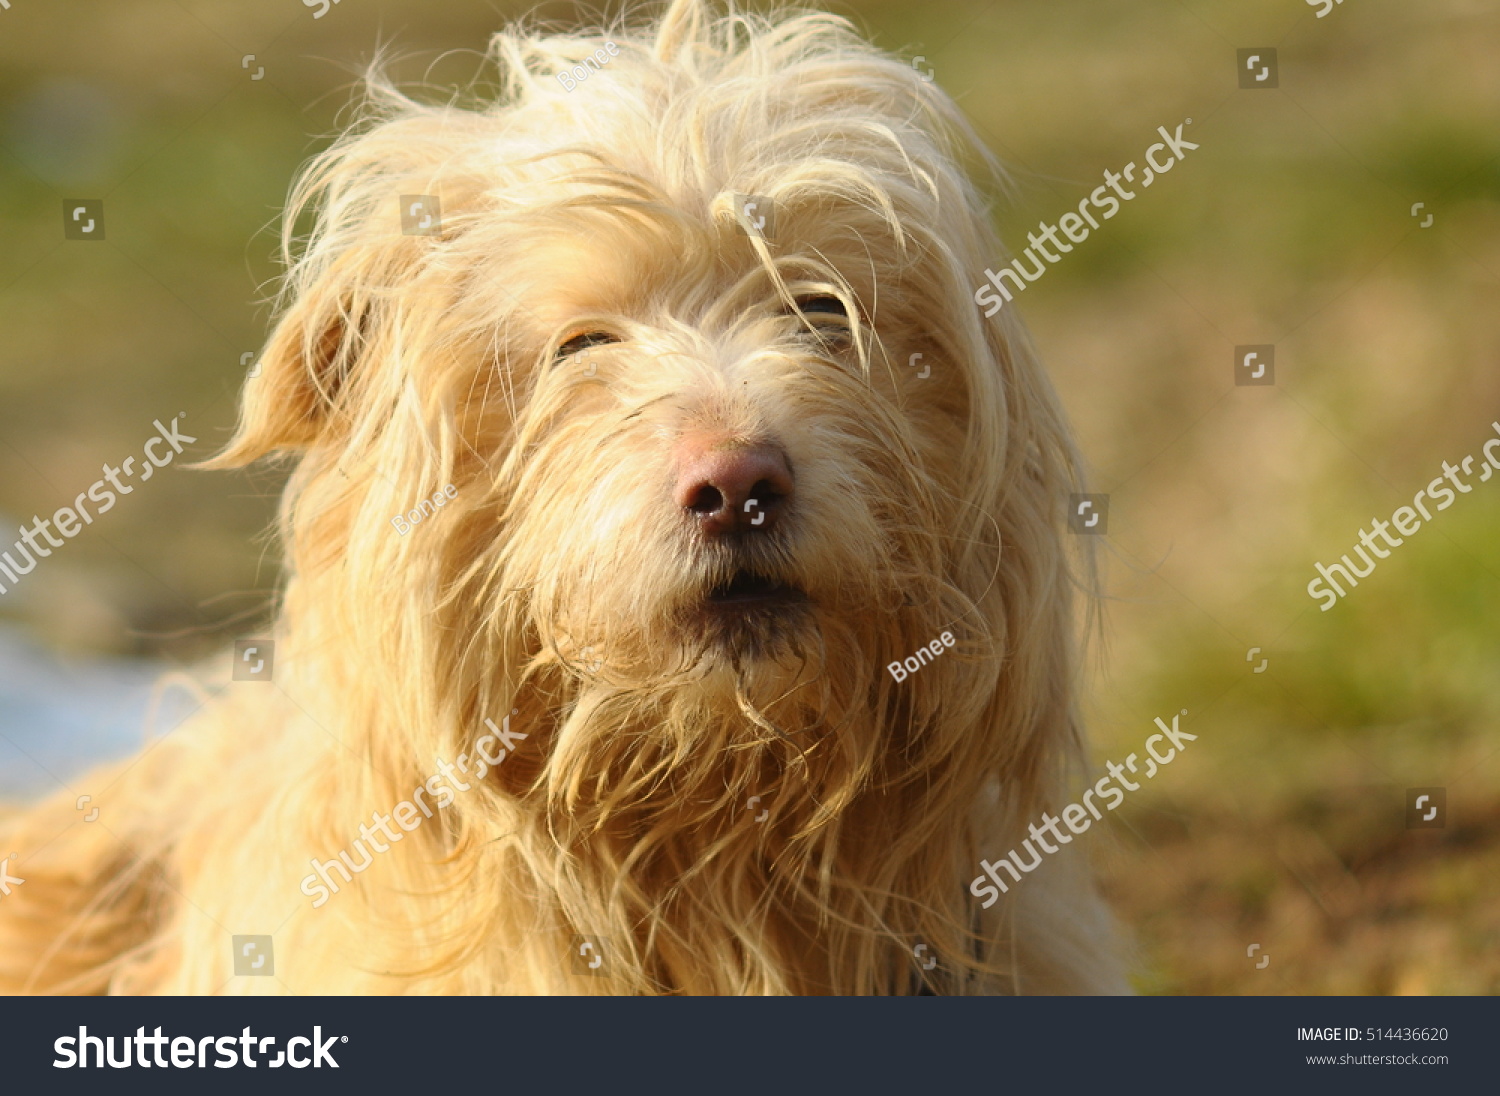 Blonde Hair Dog Portre Stock Photo Edit Now 514436620